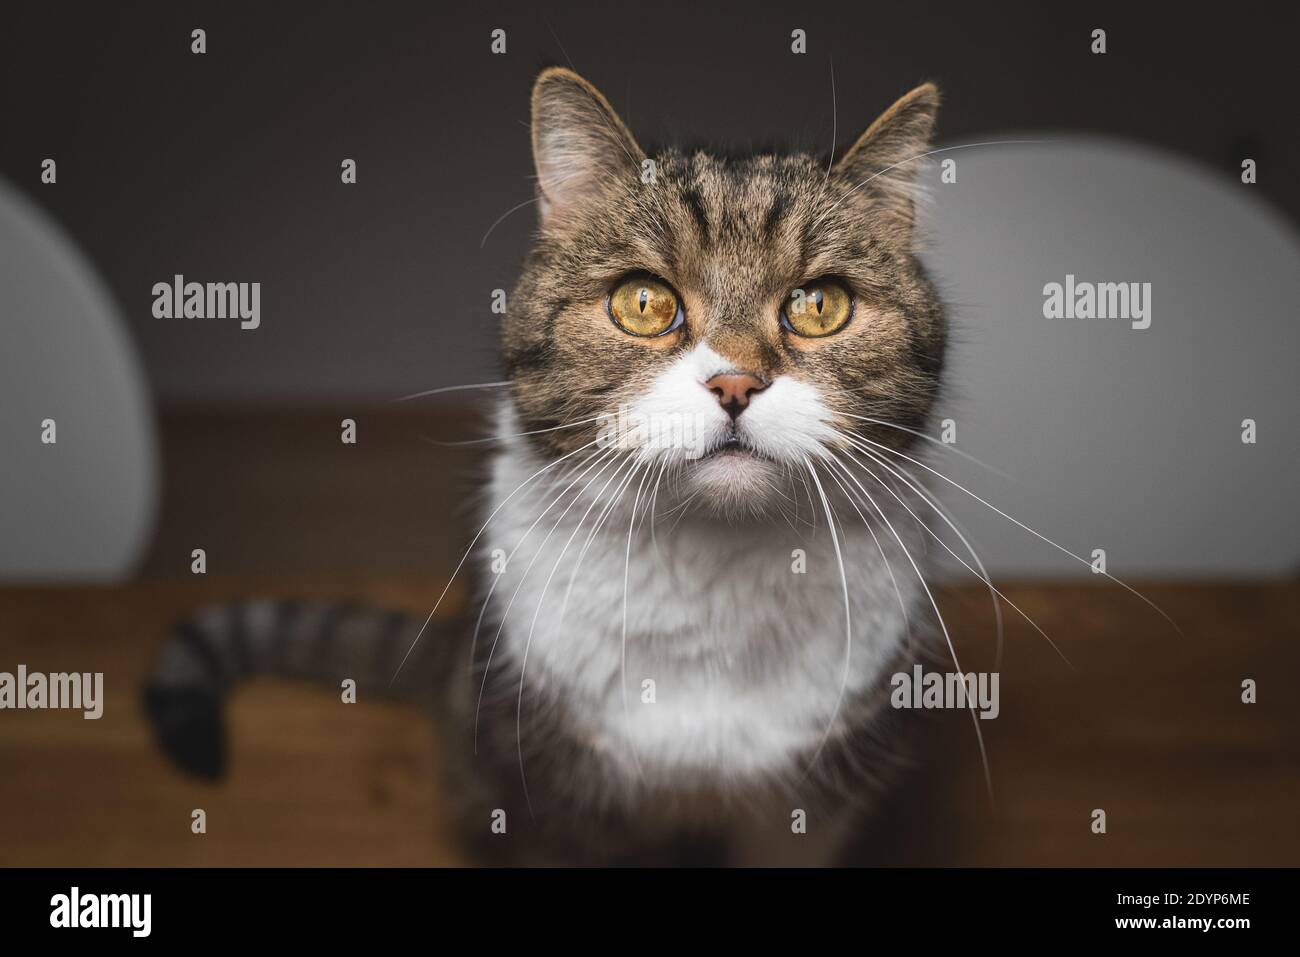 close up of a tabby british shorthair cat sitting on the dining table looking up curiously begging for food Stock Photo